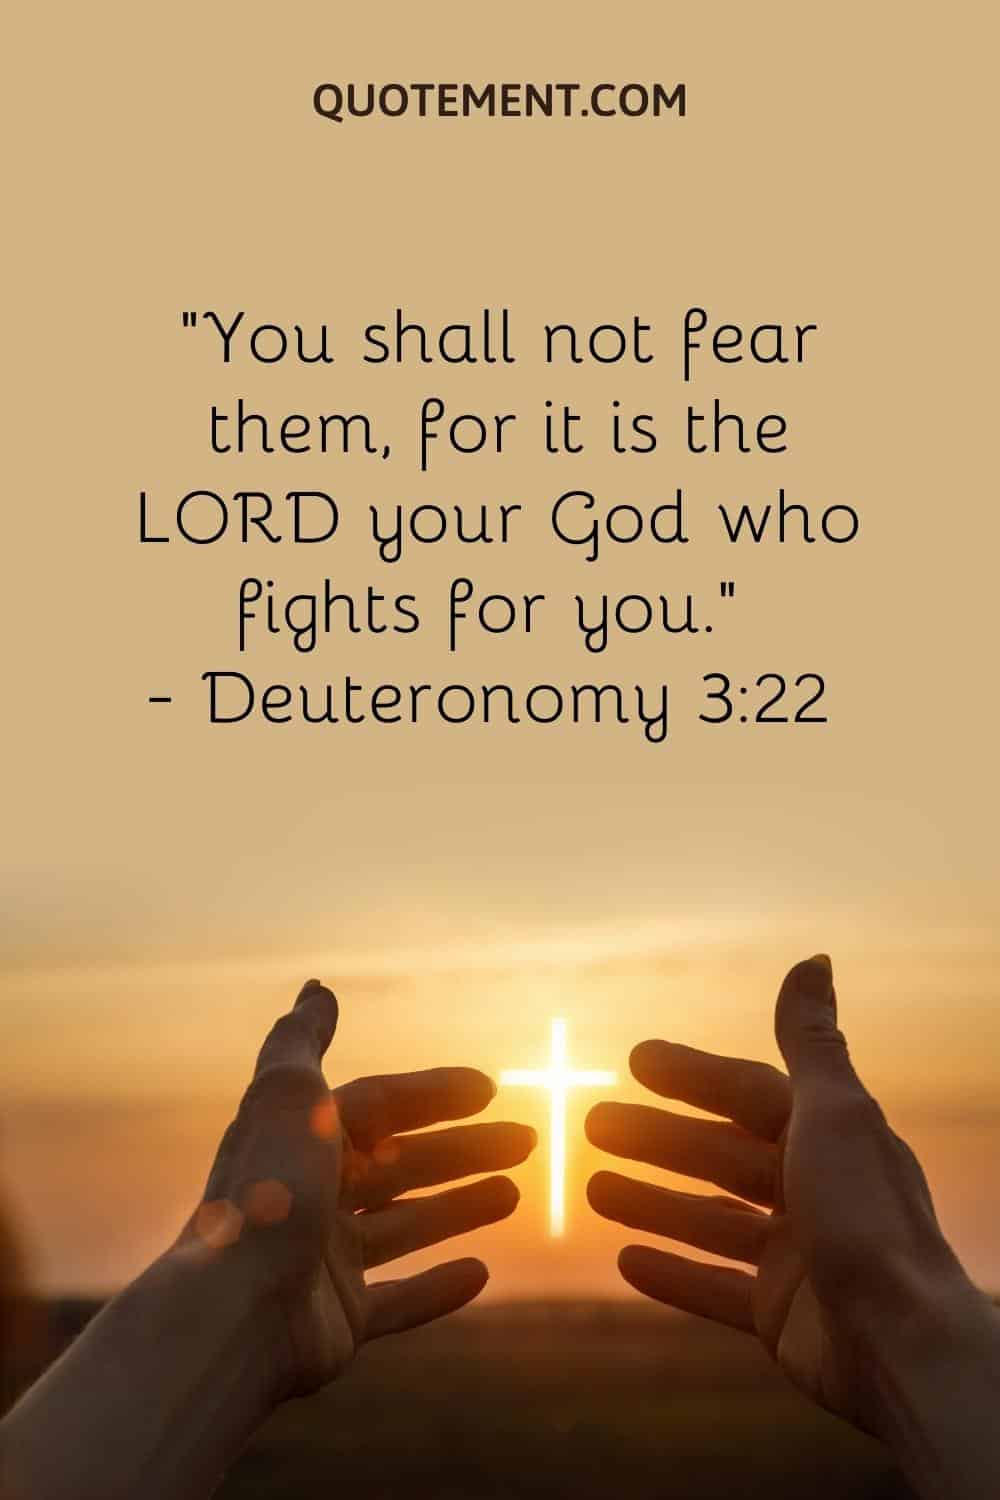 “You shall not fear them, for it is the LORD your God who fights for you.” — Deuteronomy 322
